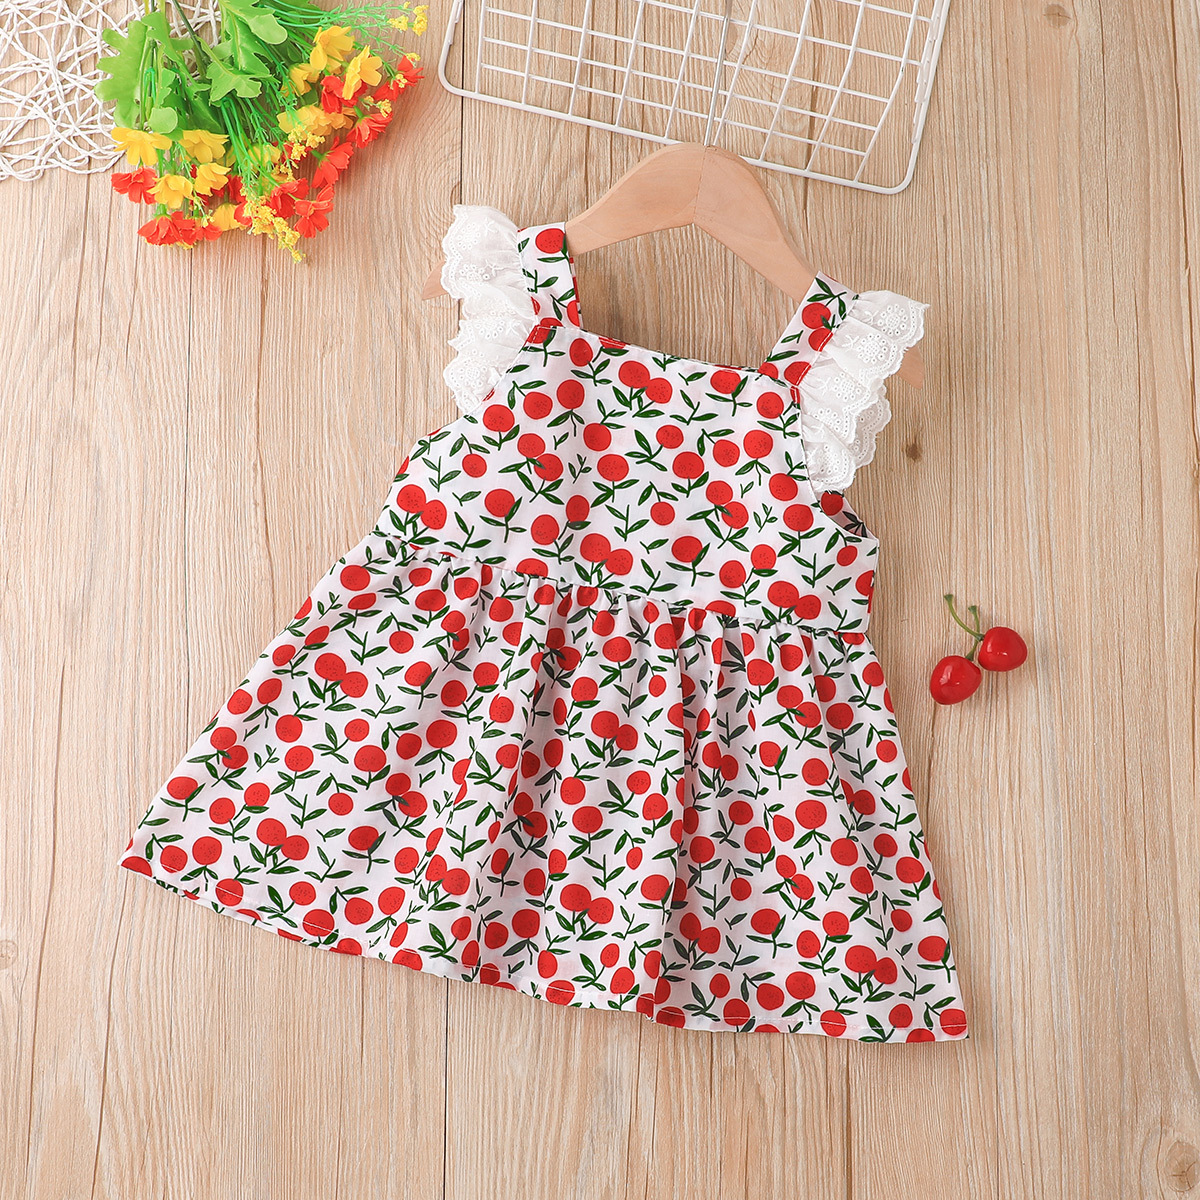 Little Girl Fashion Cherry Print Sleeveless Top and Shorts Suit TwoPiecepicture3